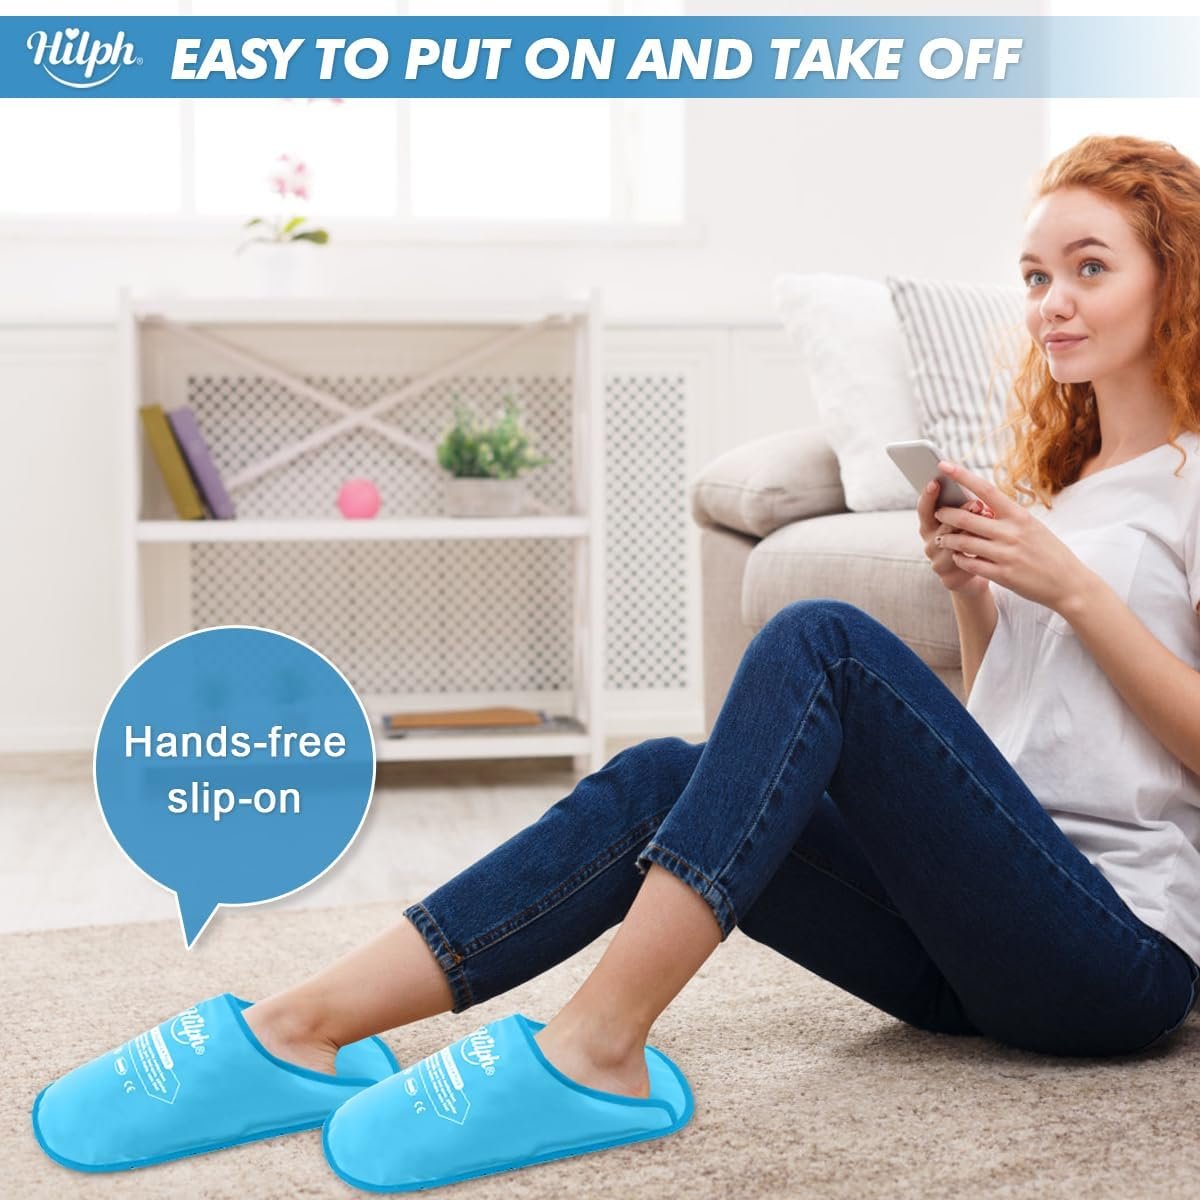 Hilph Foot Ice Pack Slippers Review